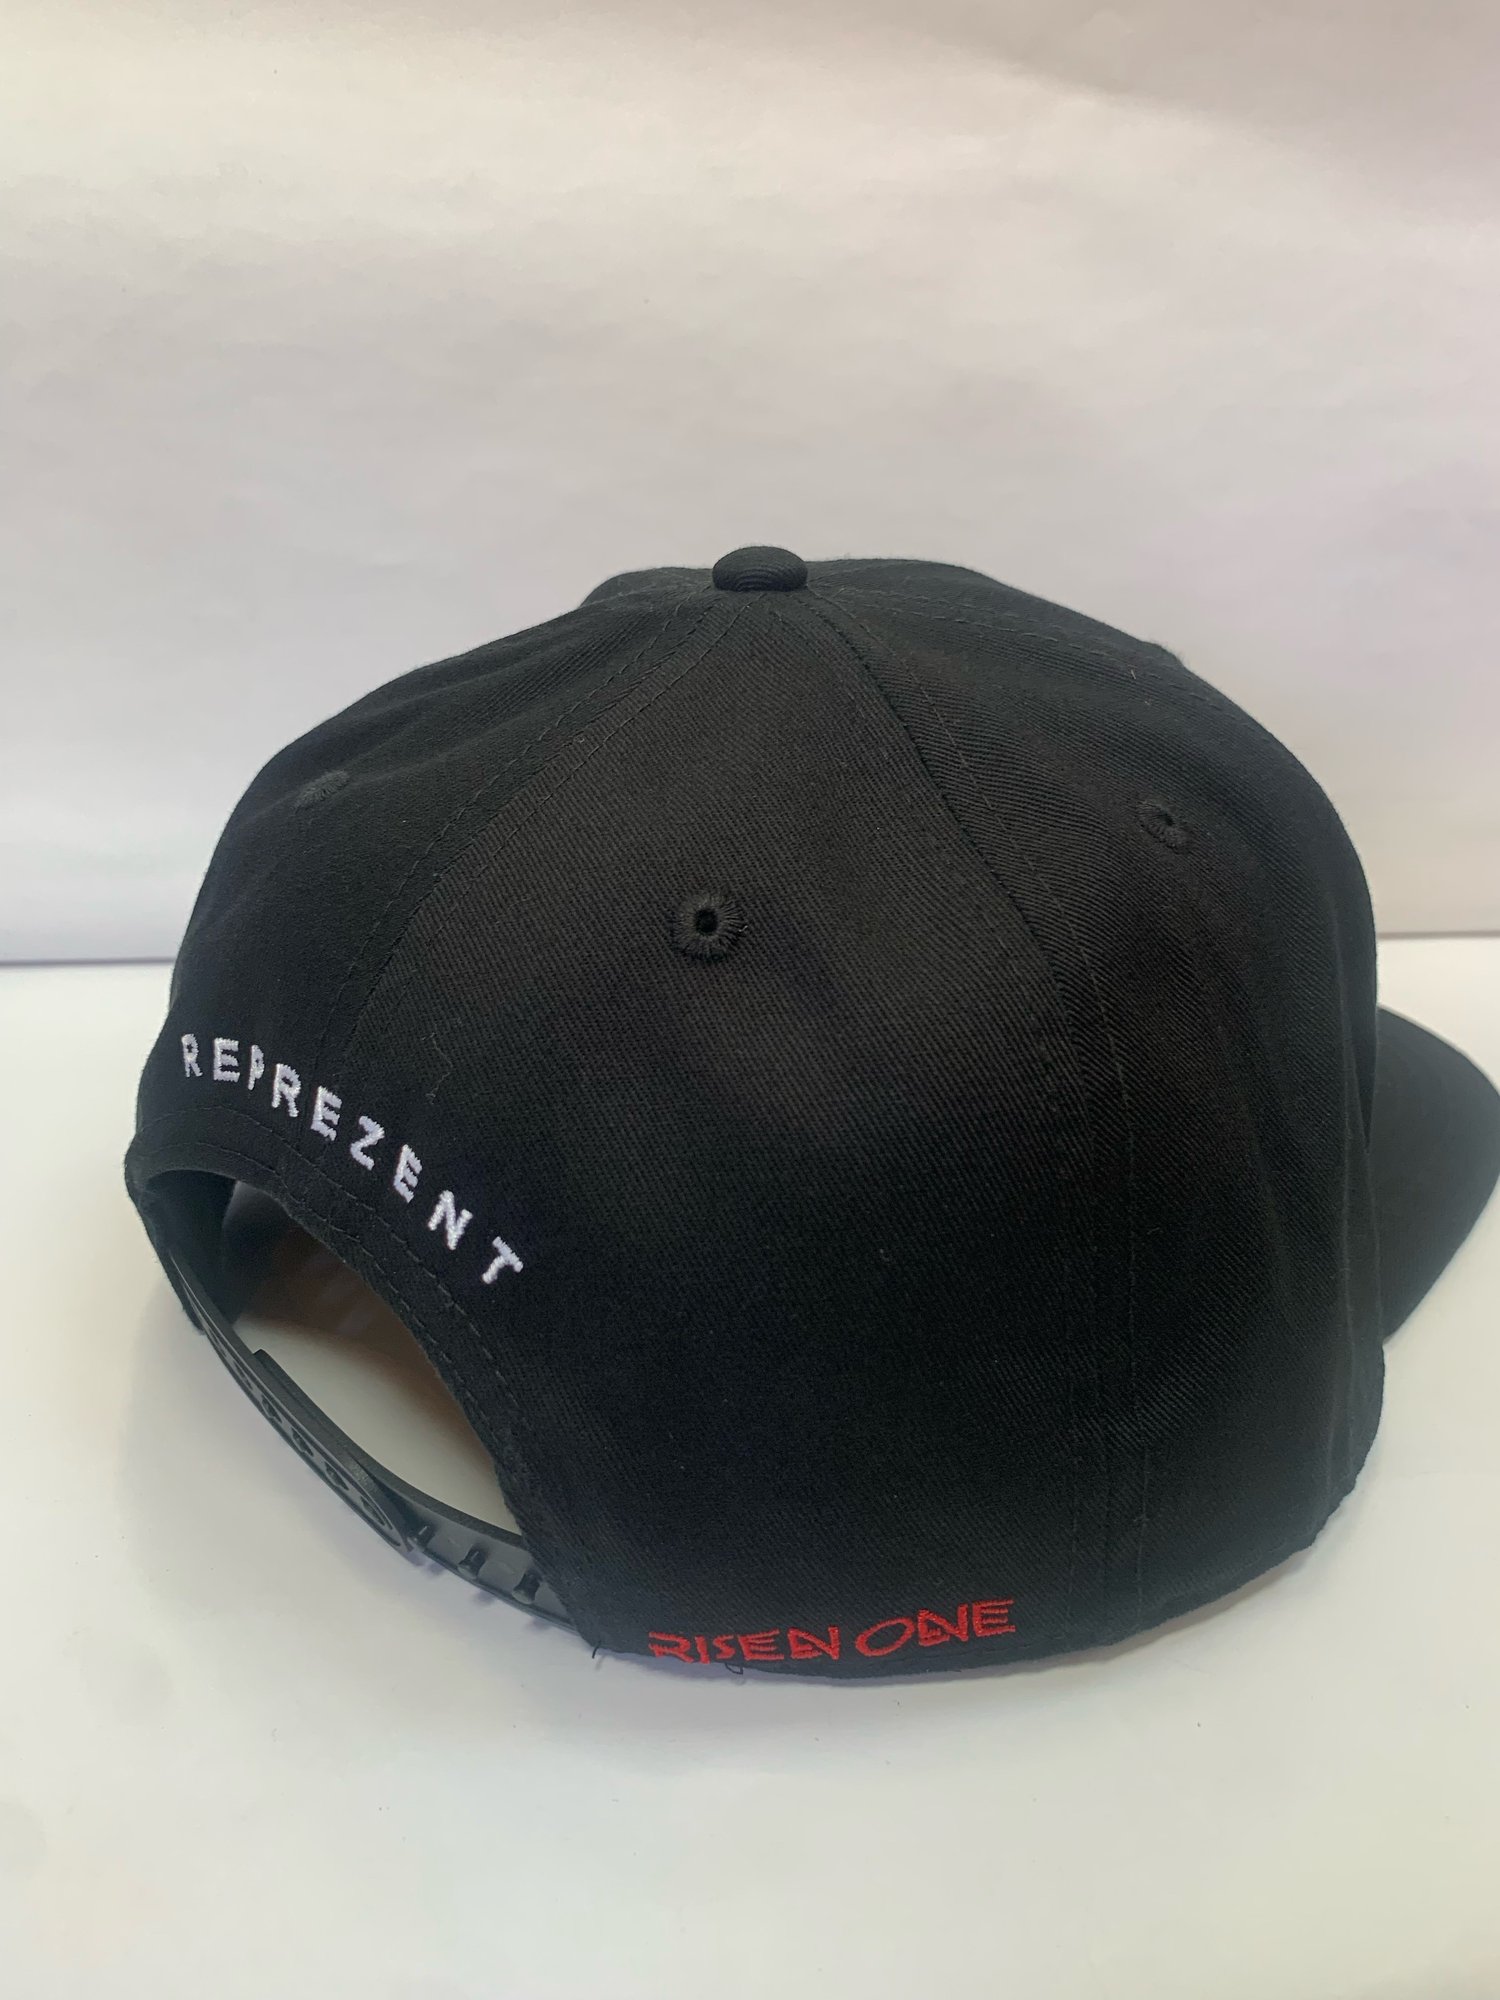 Image of Limited “Risen One” Dragon SnapBack 